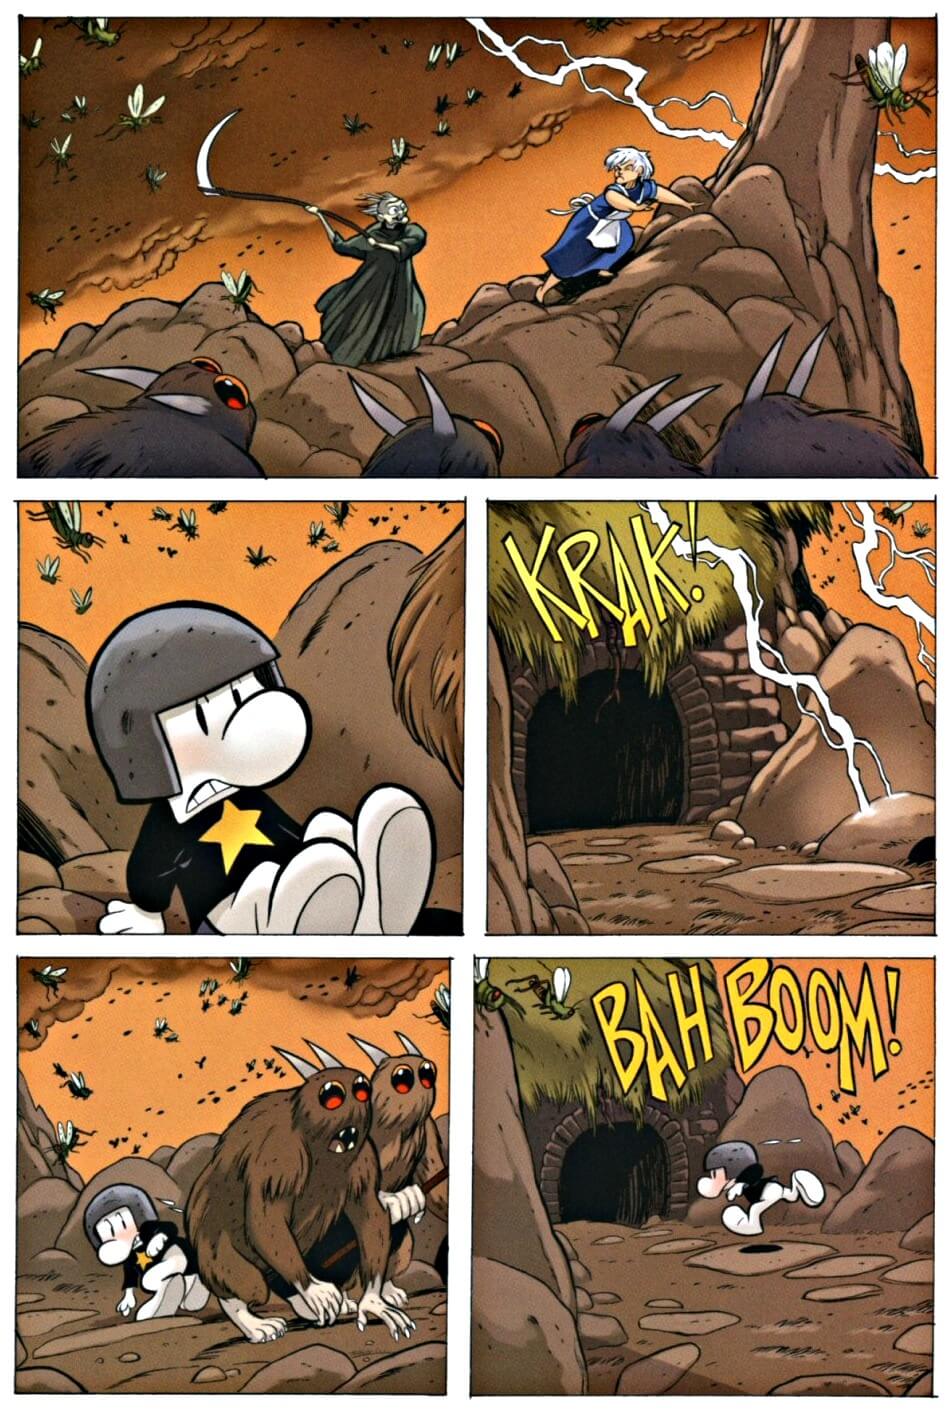 page 145 chapter 5 of bone 9 crown of horns graphic novel